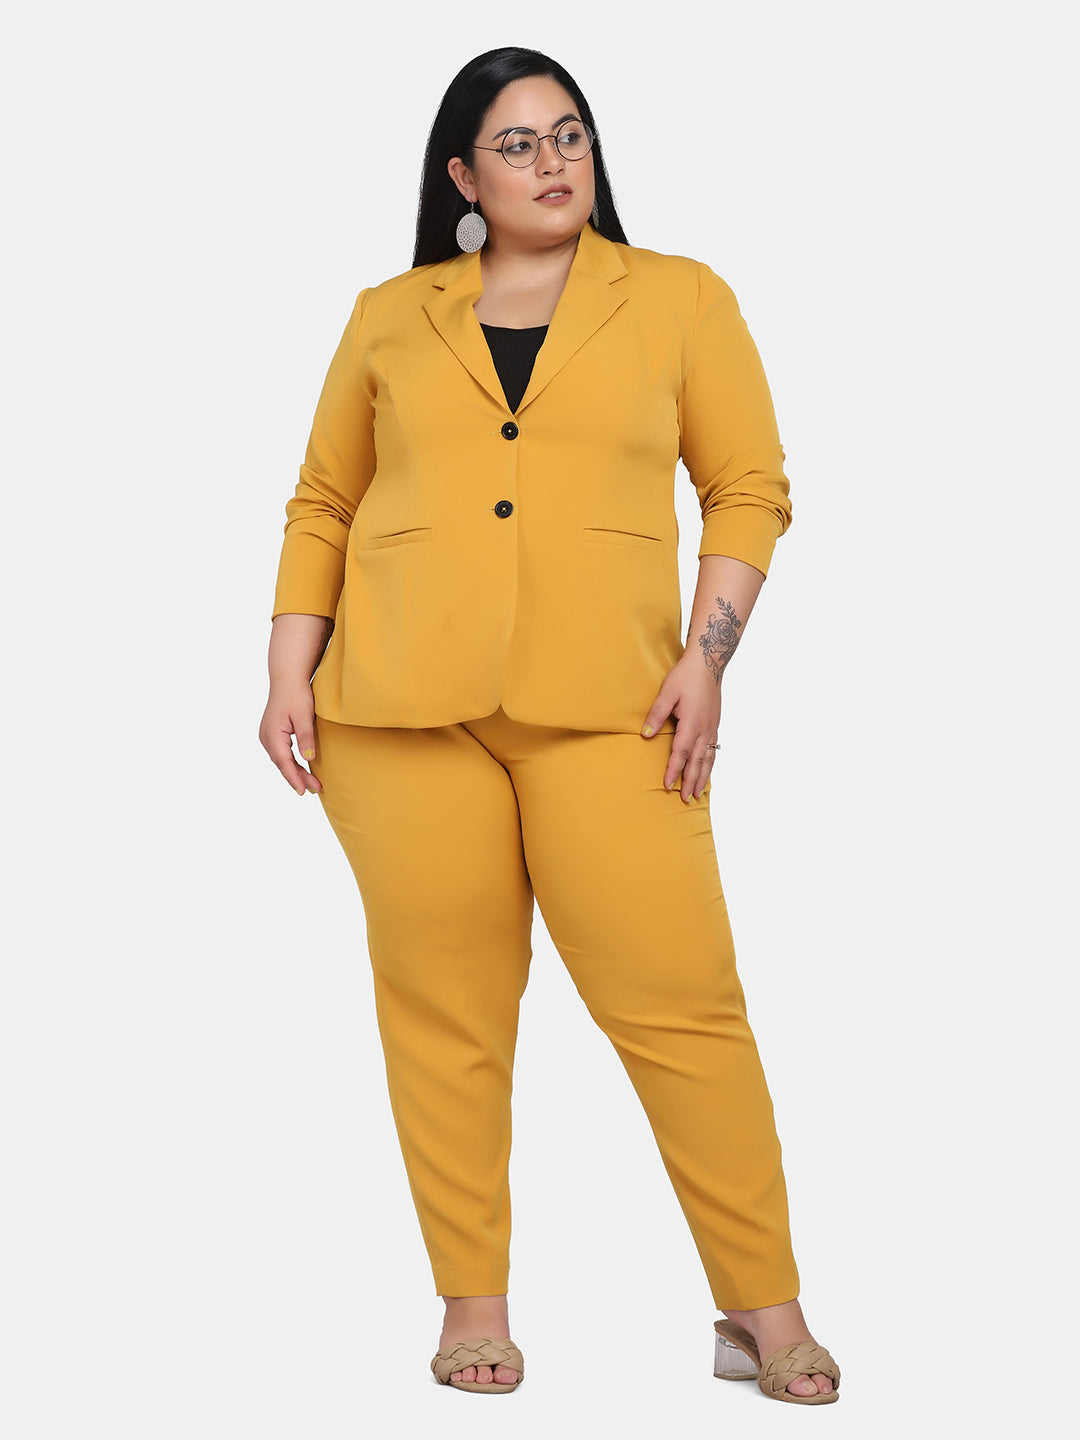 Pink Mother Of The Bride Pants Suit Formal Evening Womens Party Tuxedo For  Women, Perfect For Weddings And Work Wear From Verycute, $43.44 | DHgate.Com